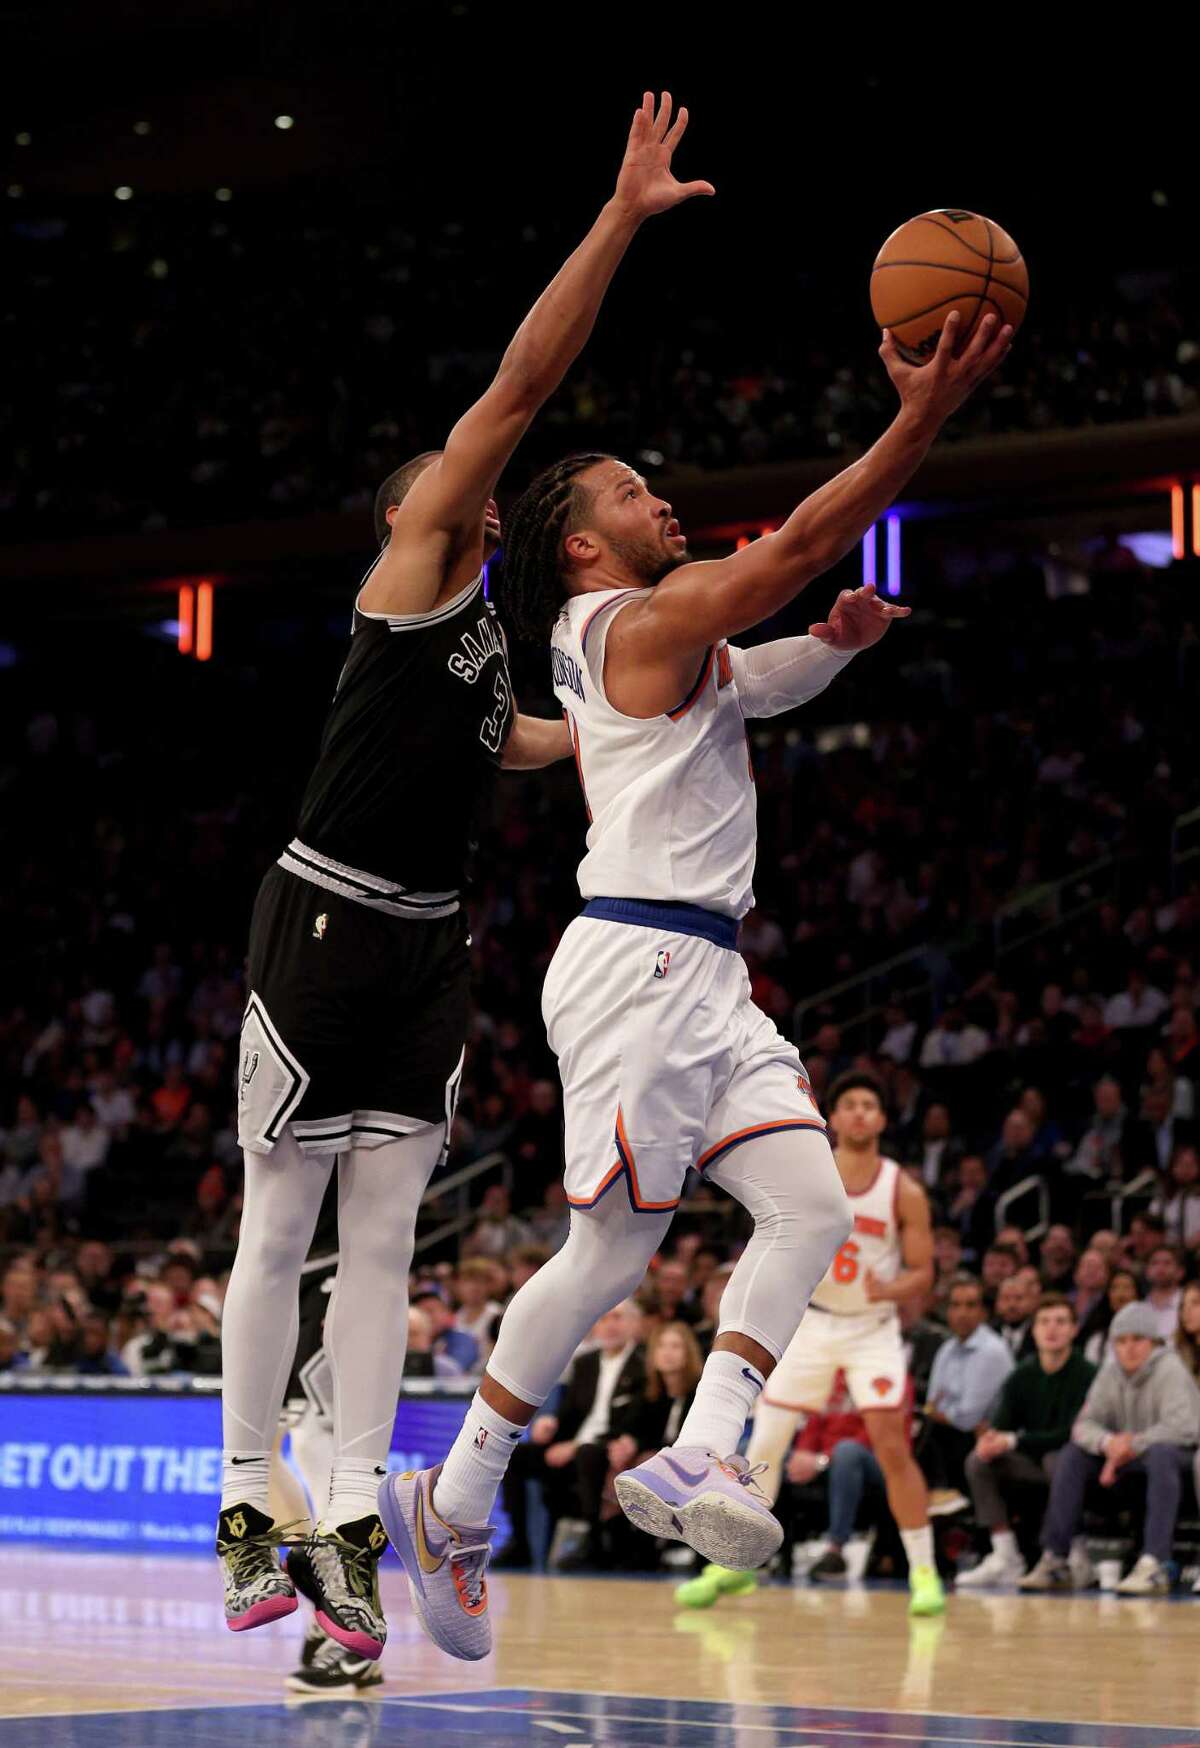 The Knicks’ Jalen Brunson, long a nemesis of the Spurs in his Dallas days, drives past the Spurs’ Keldon Johnson for two of his career-high 38 points Wednesday in New York.